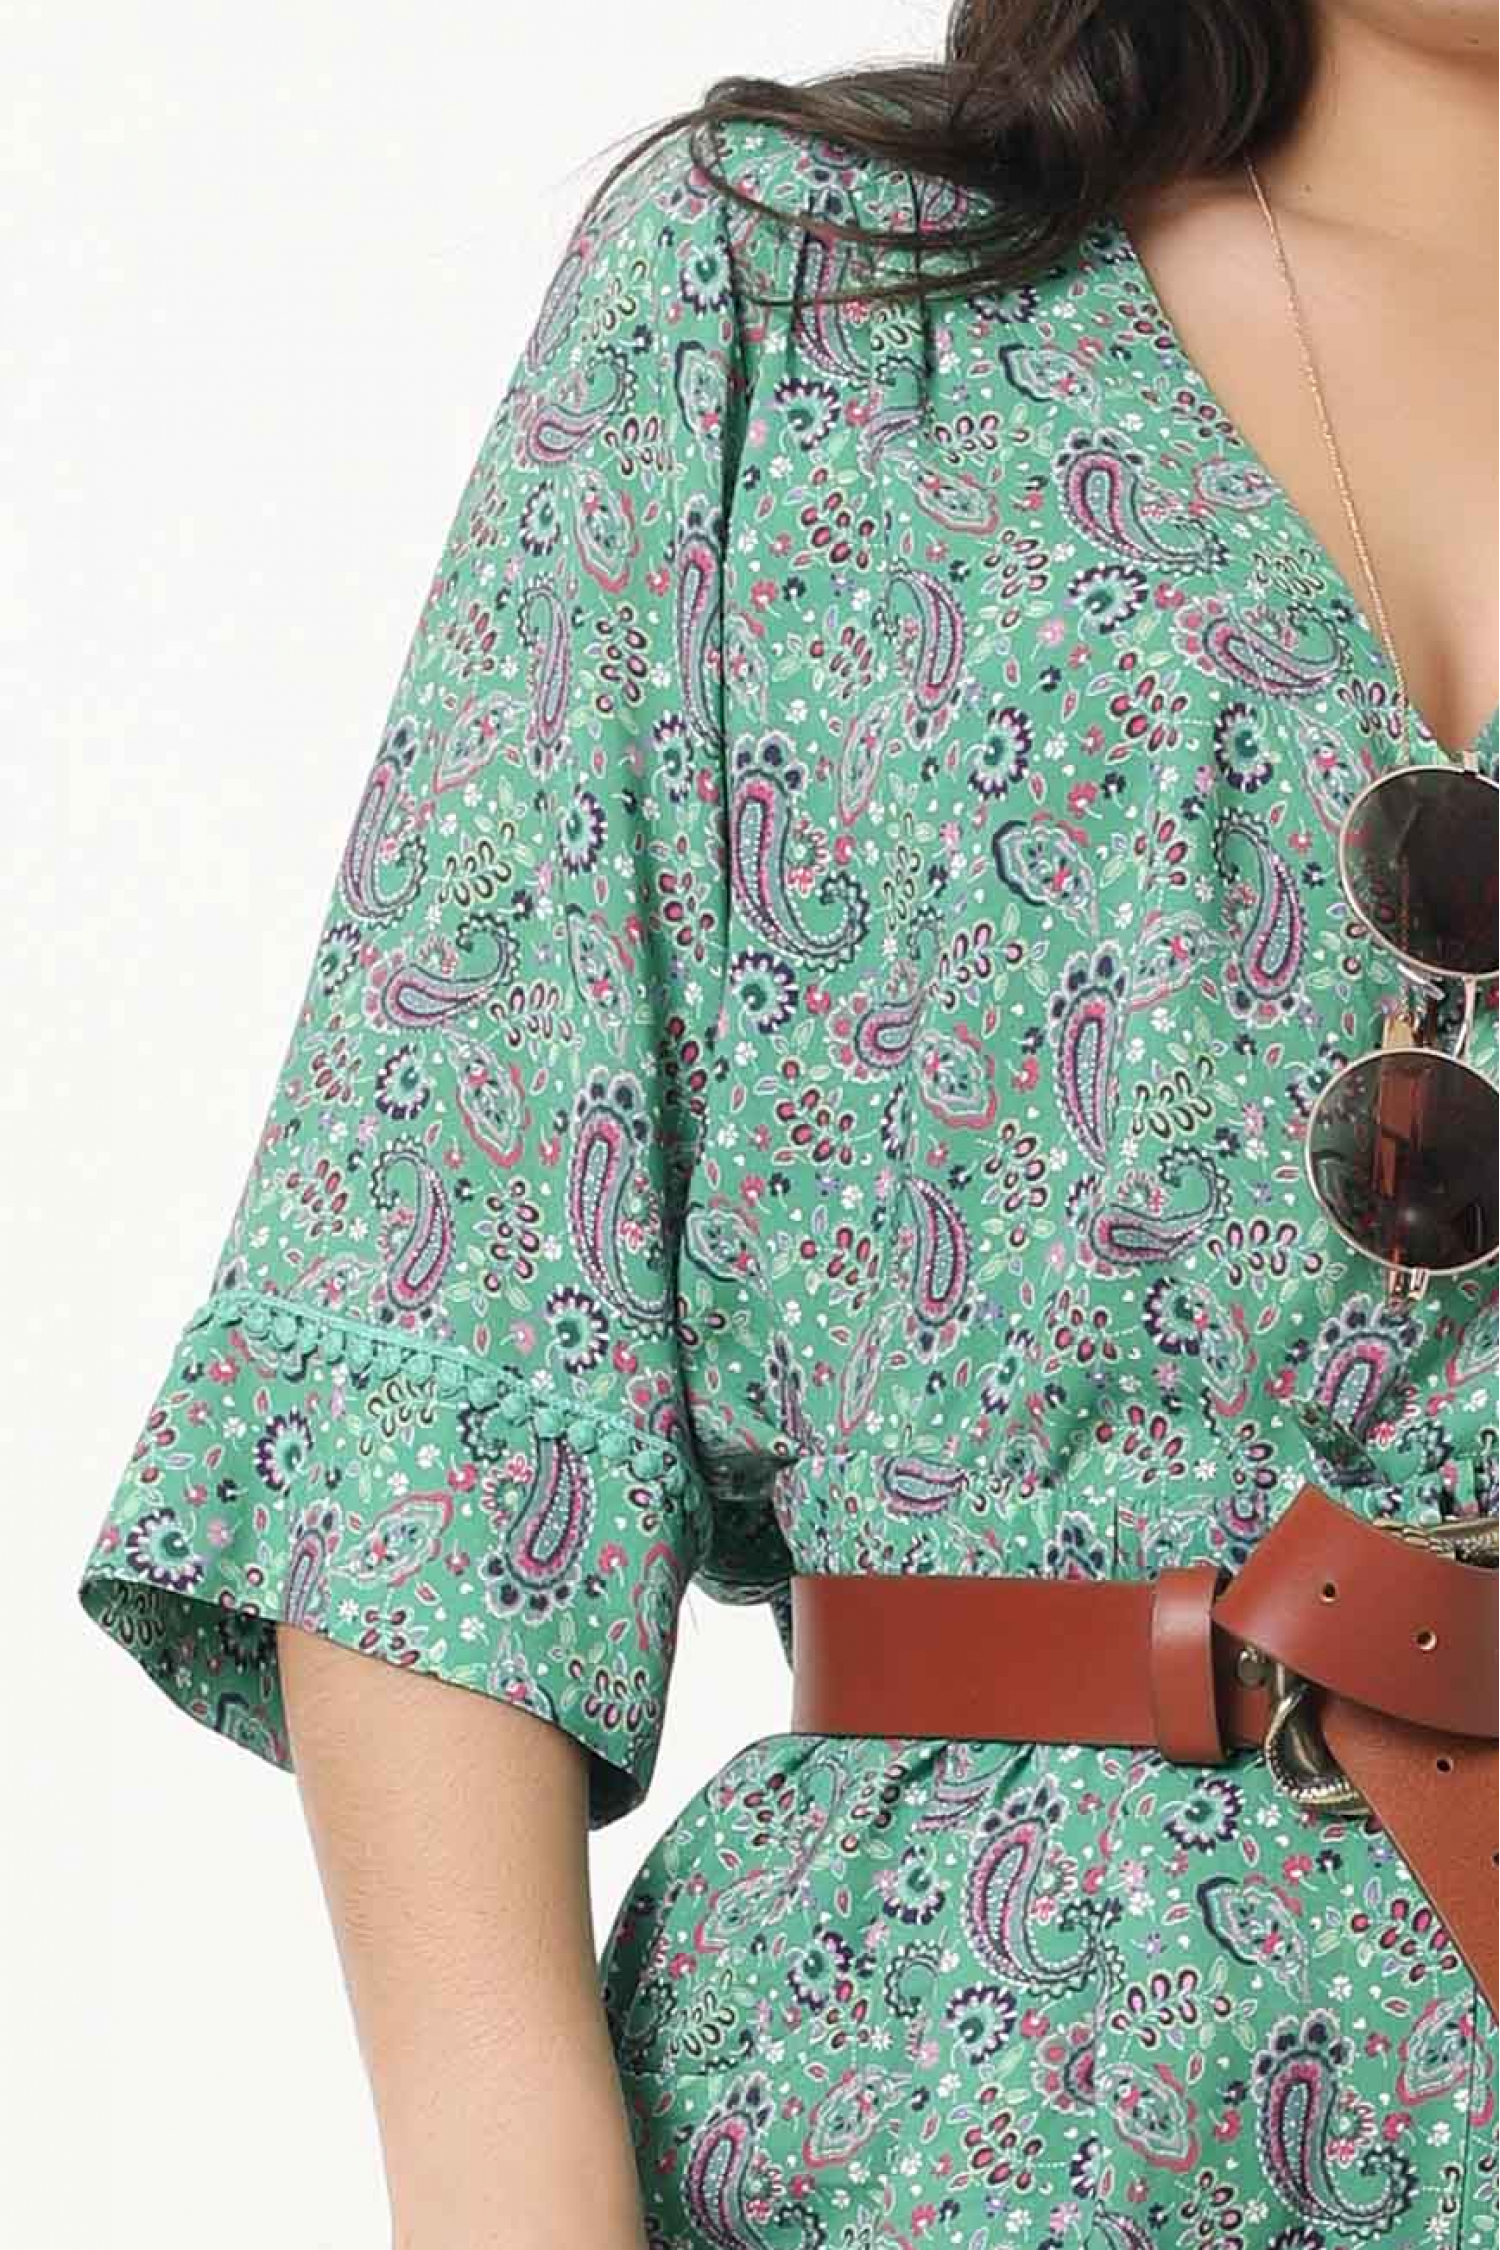 V-neck printed blouse in eco-responsible material